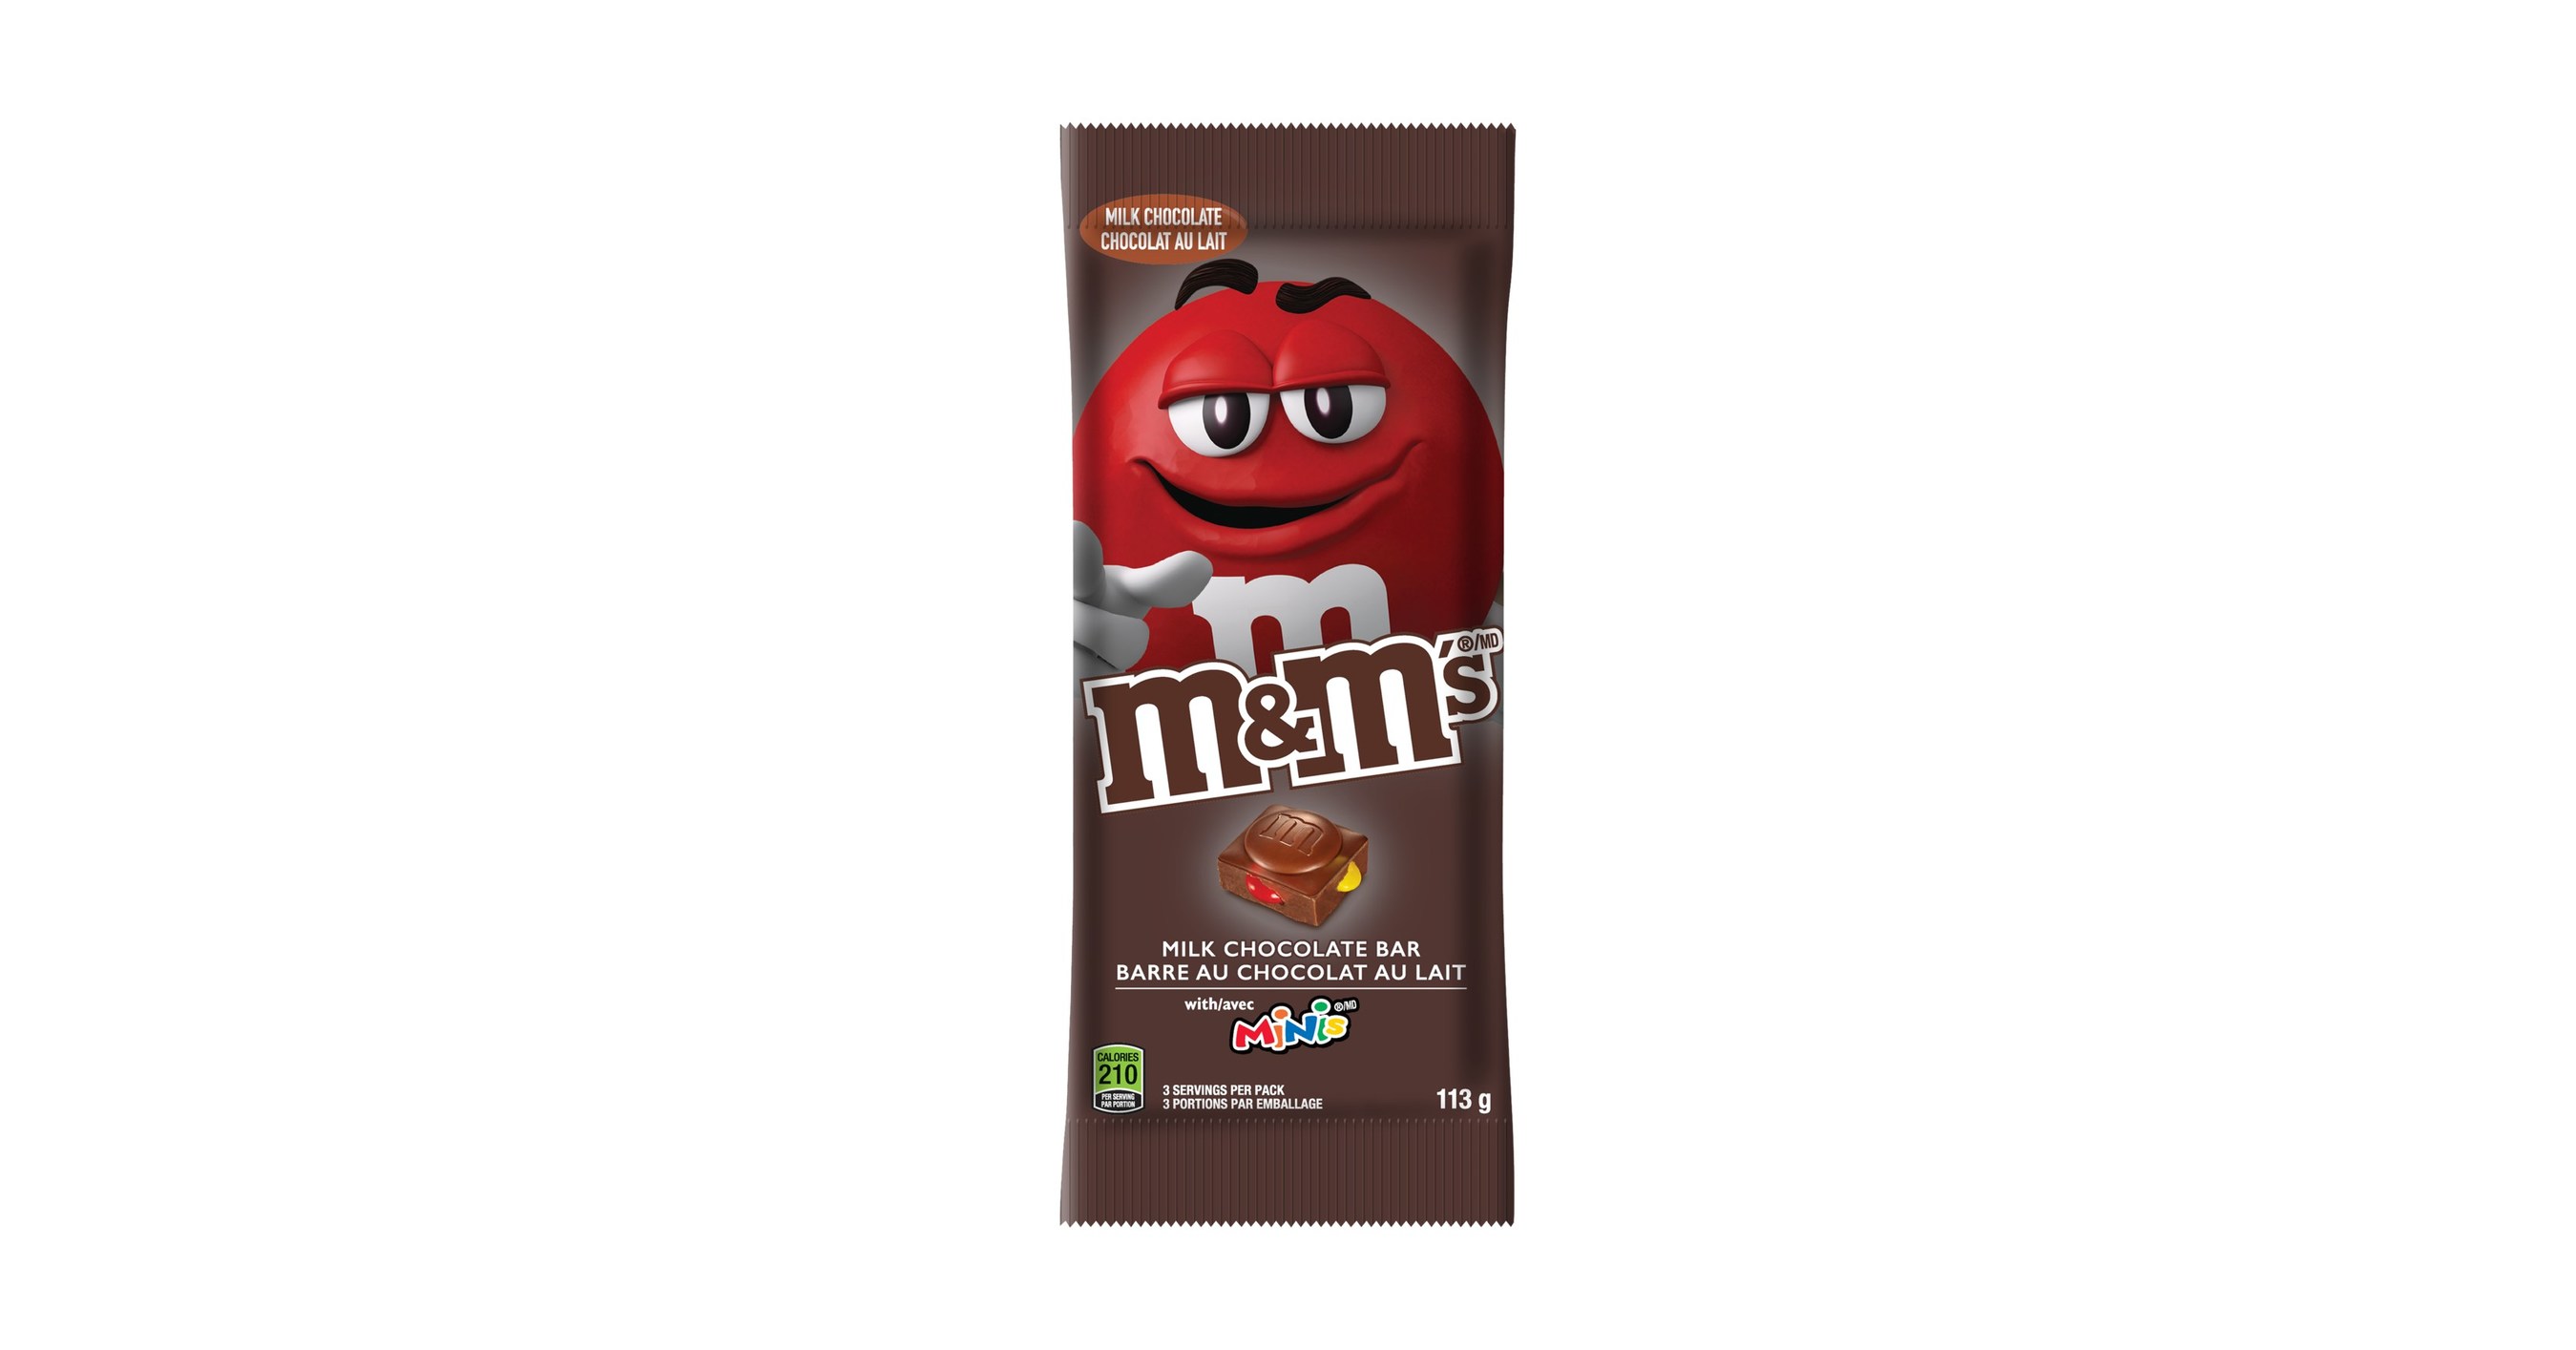 M&M's Extra Large Tablet Bar Milk Chocolate with Mini's and Crisp Rice  (110g)